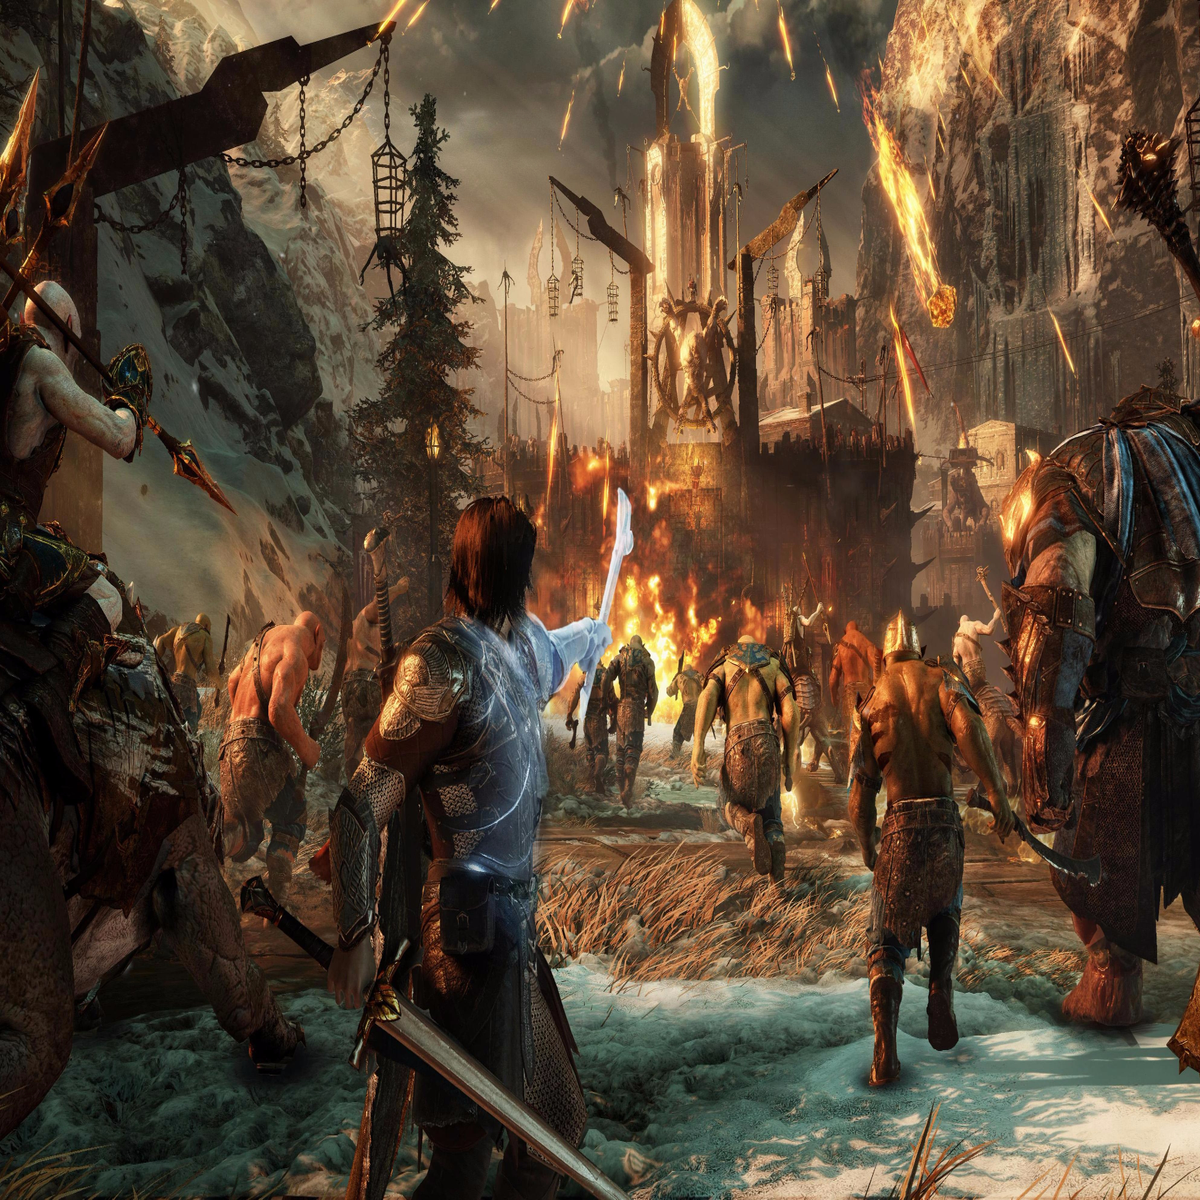 New 'Shadows of Mordor' Trailer Tells an Epic Tale From Middle